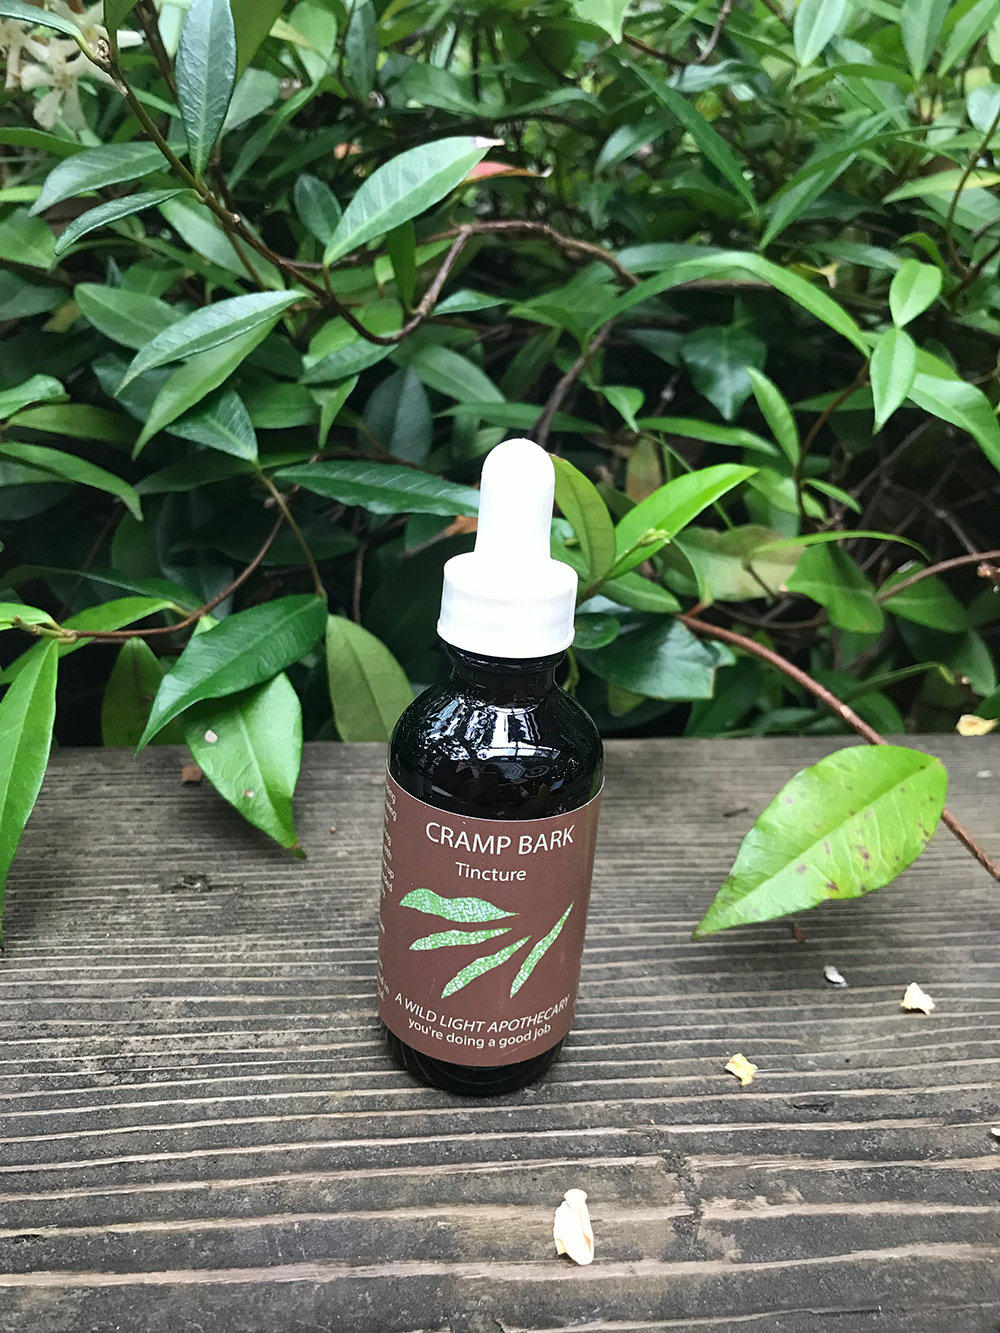 Cramp Bark Tincture by a Wild Light Apothecary